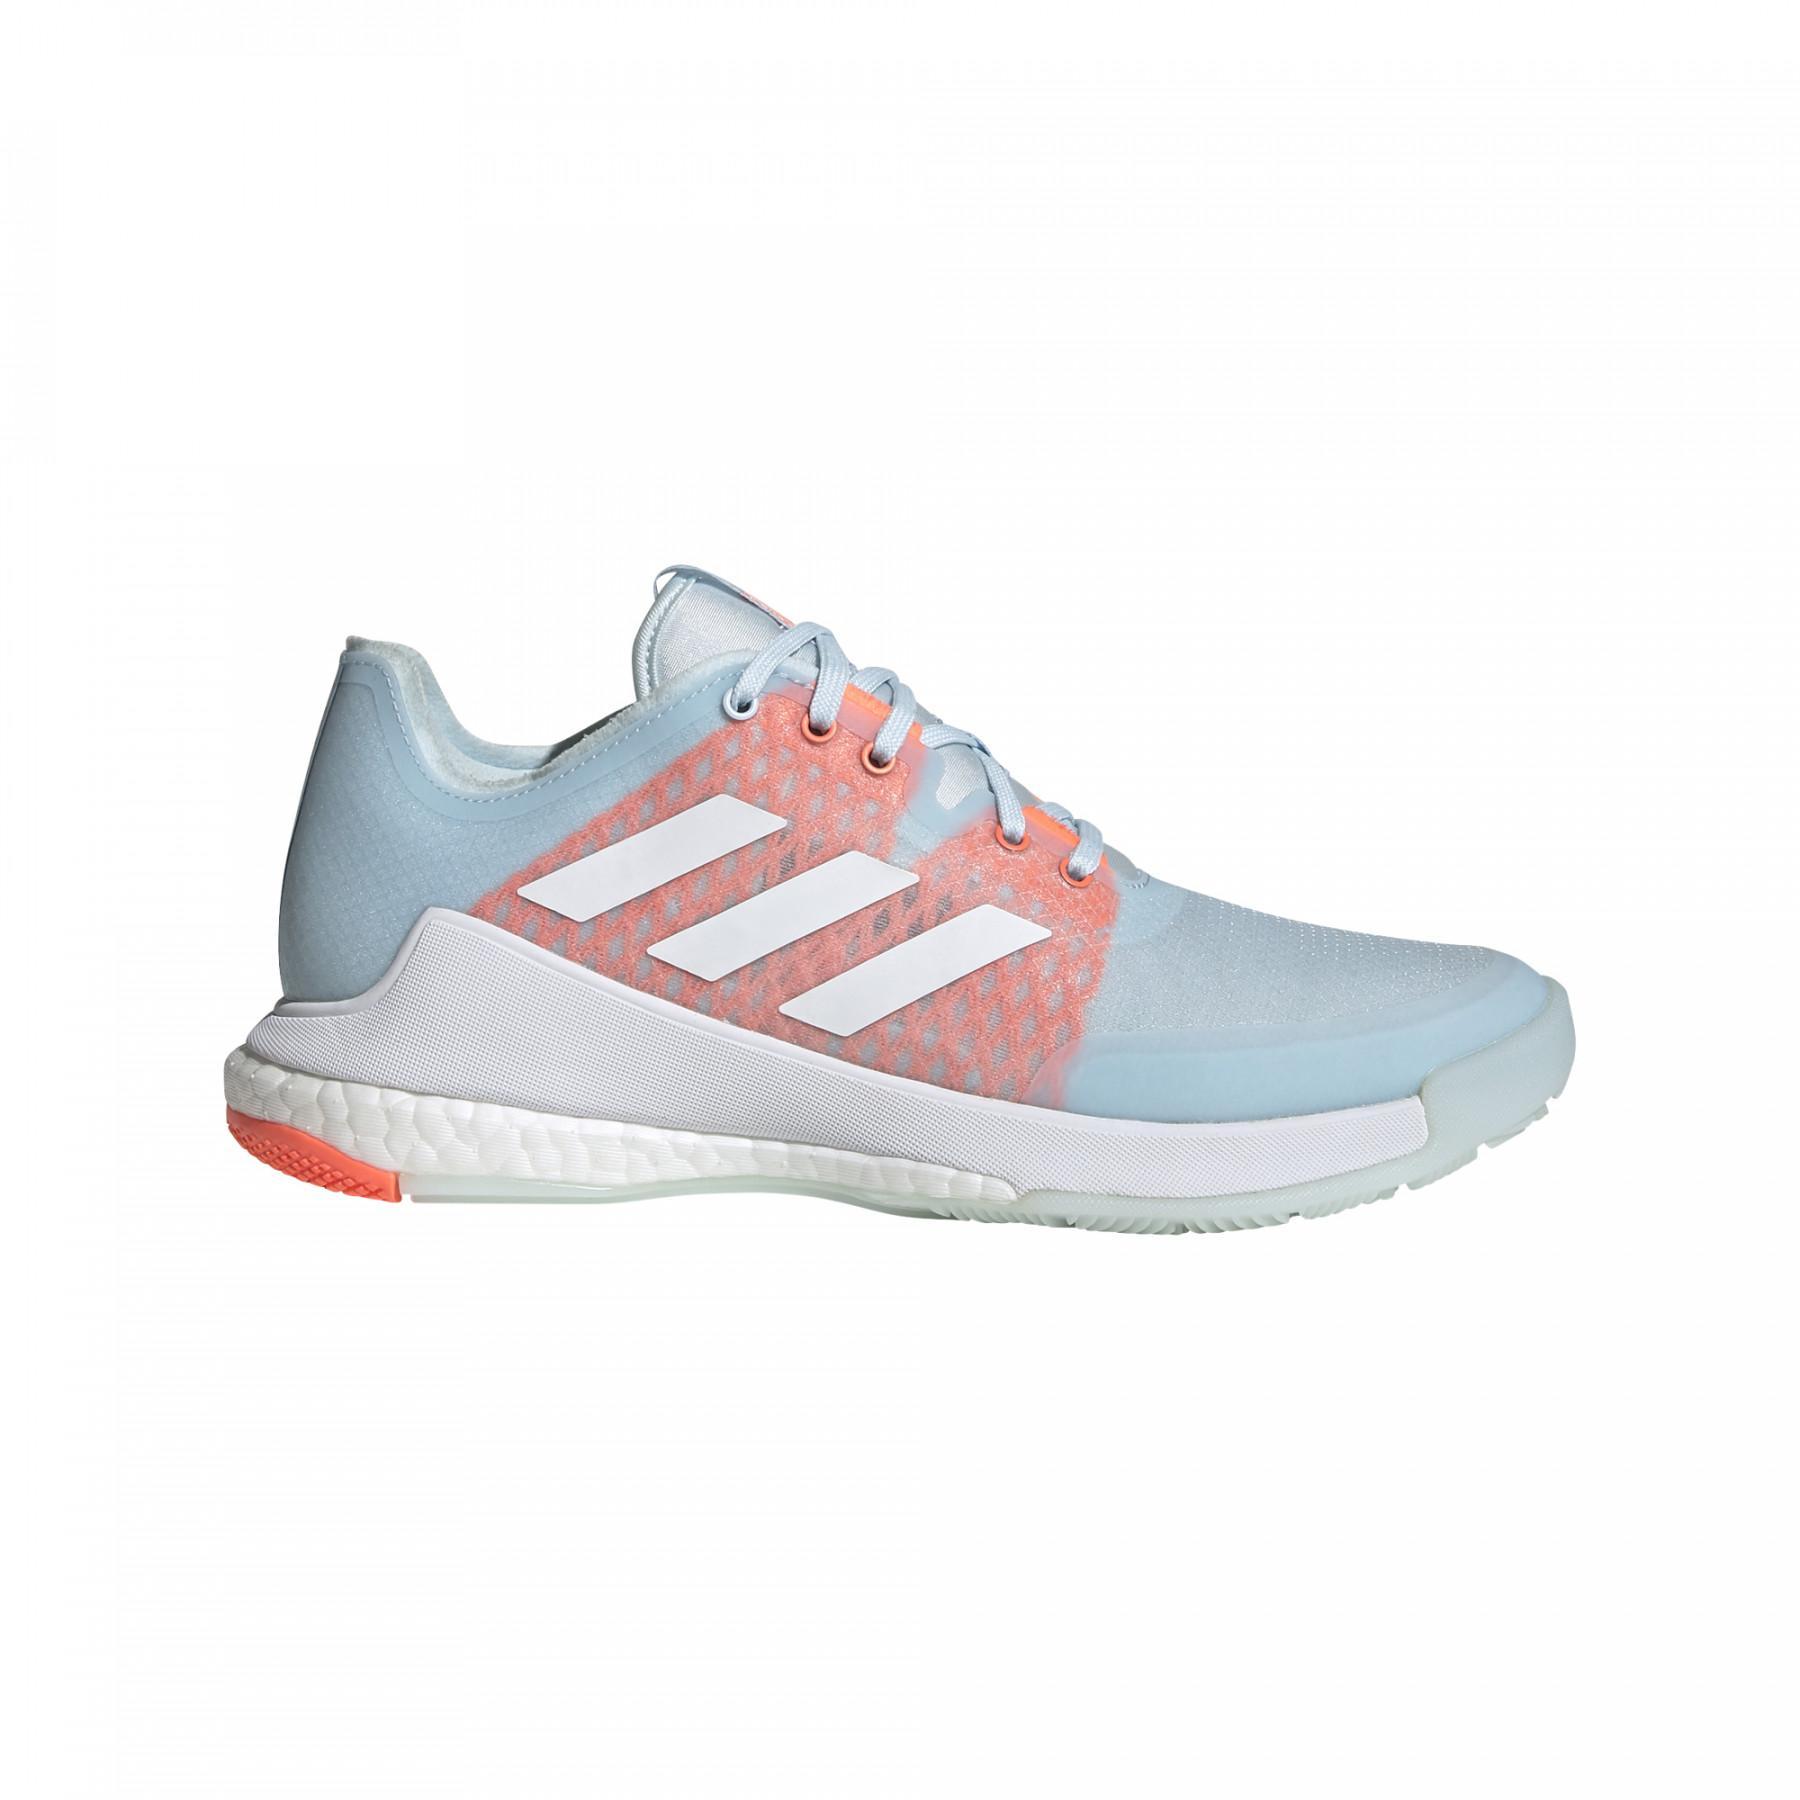 on the other hand, elect valve Chaussures femme adidas Crazyflight